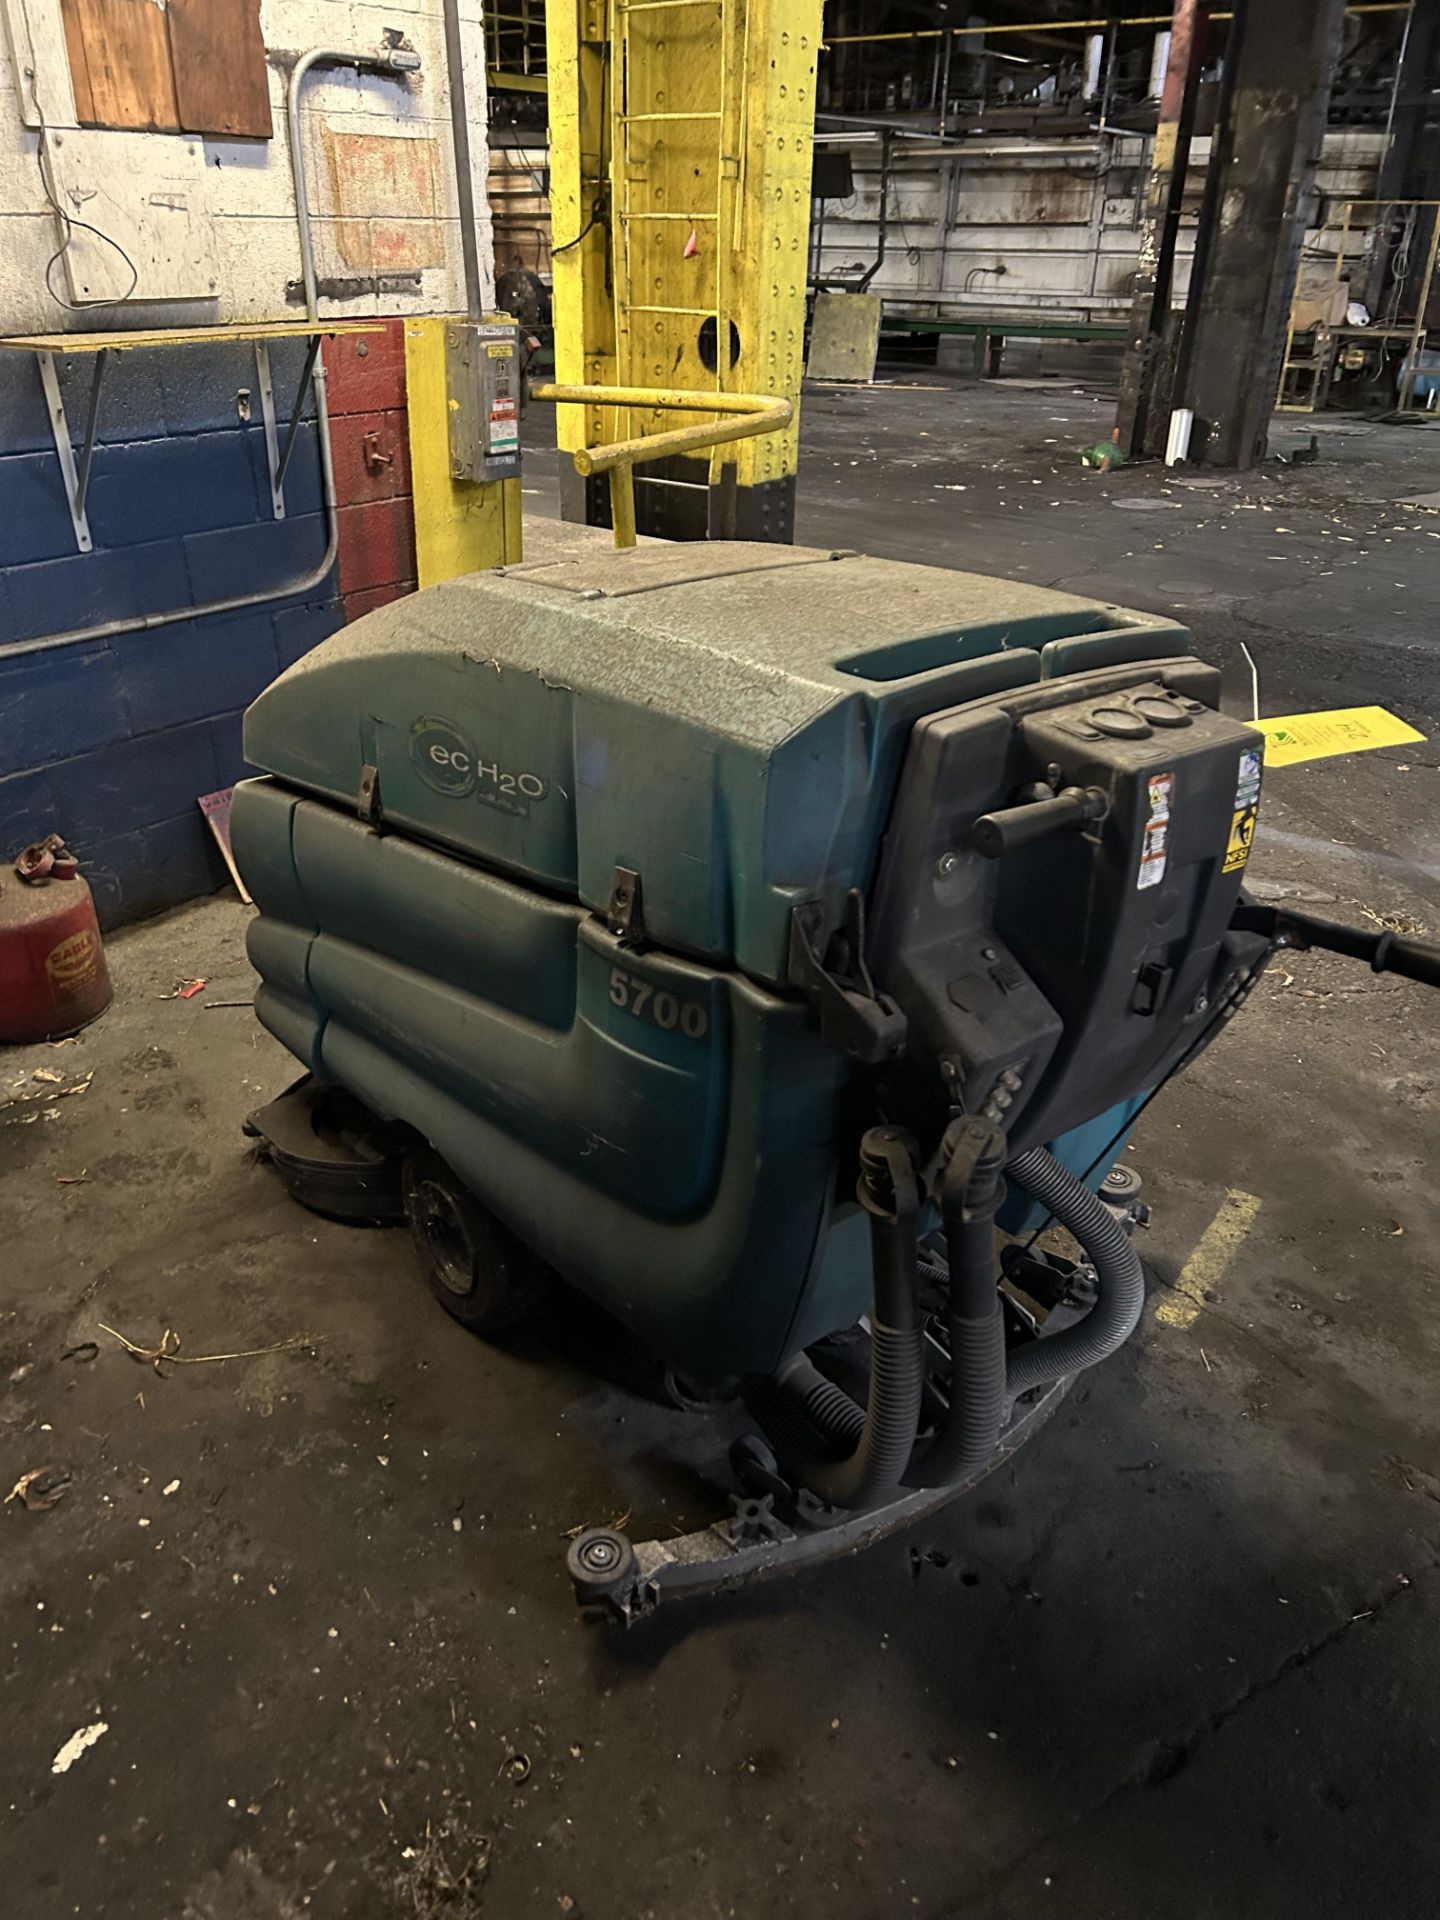 Tennant Floor Scrubber, Model #5700, Rigging/ Removal Fee - $75 - Image 2 of 4